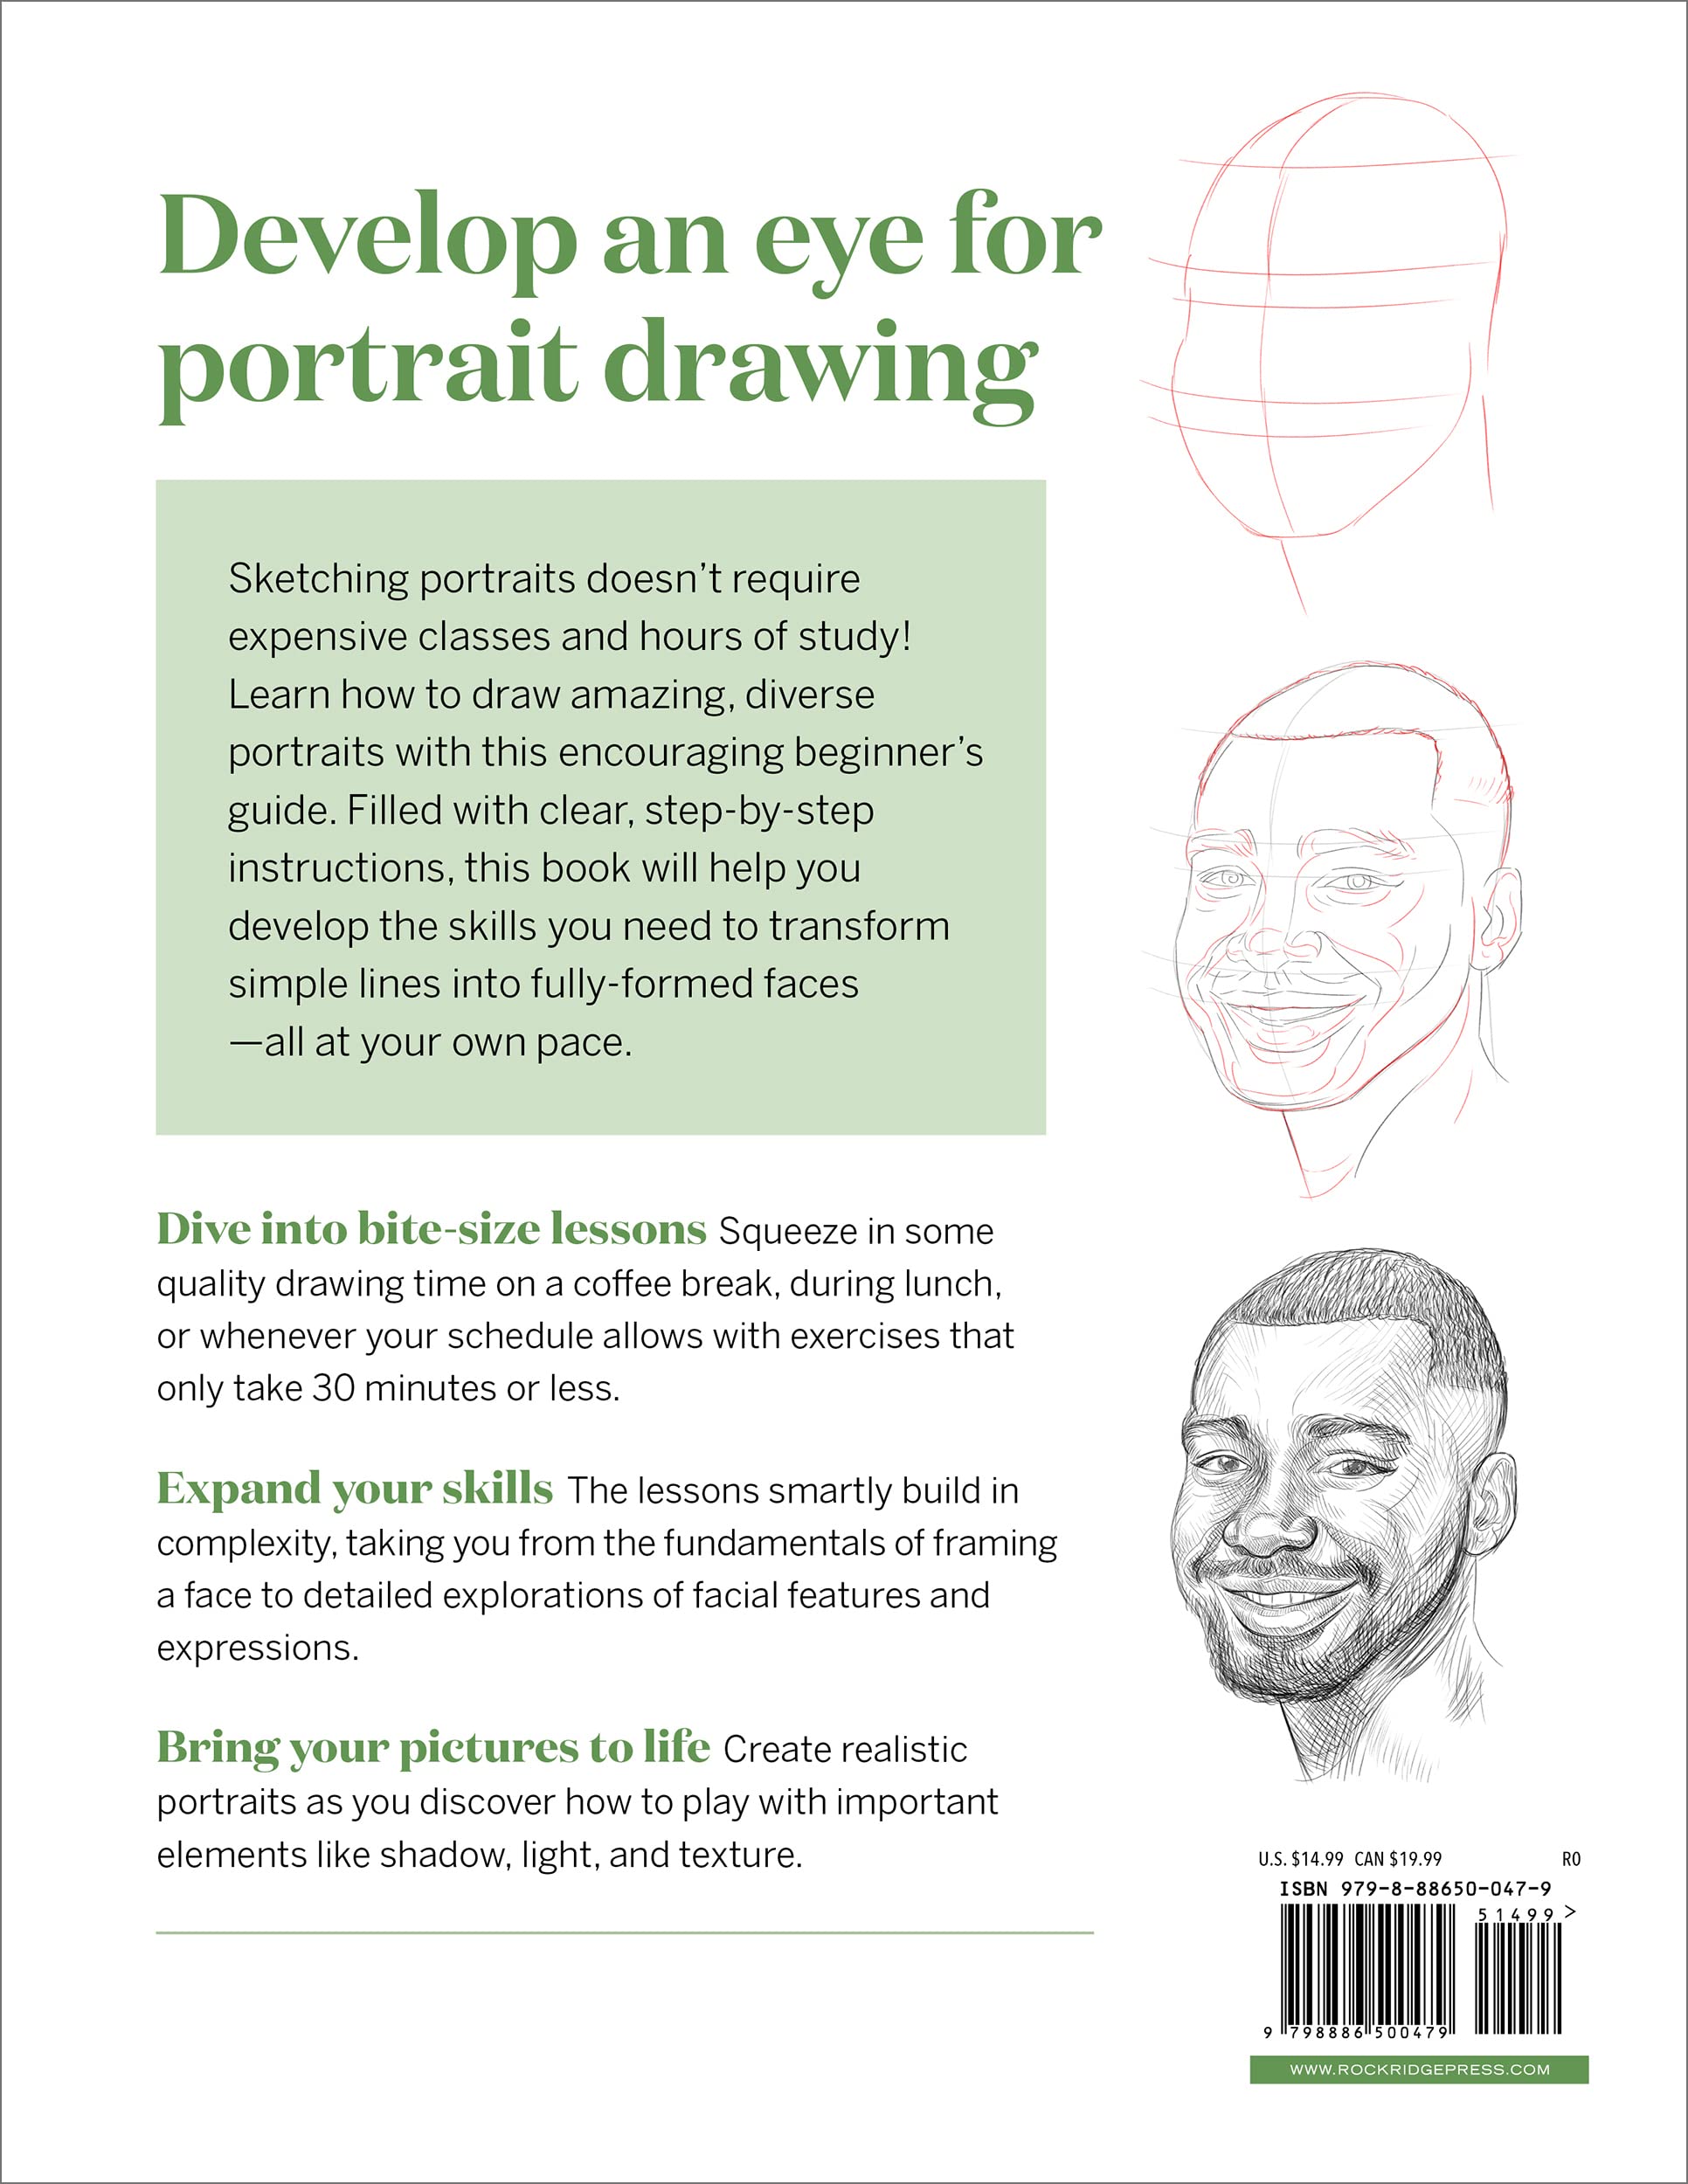 Learning How to Draw in Grade One | ART LESSONS FOR KIDS